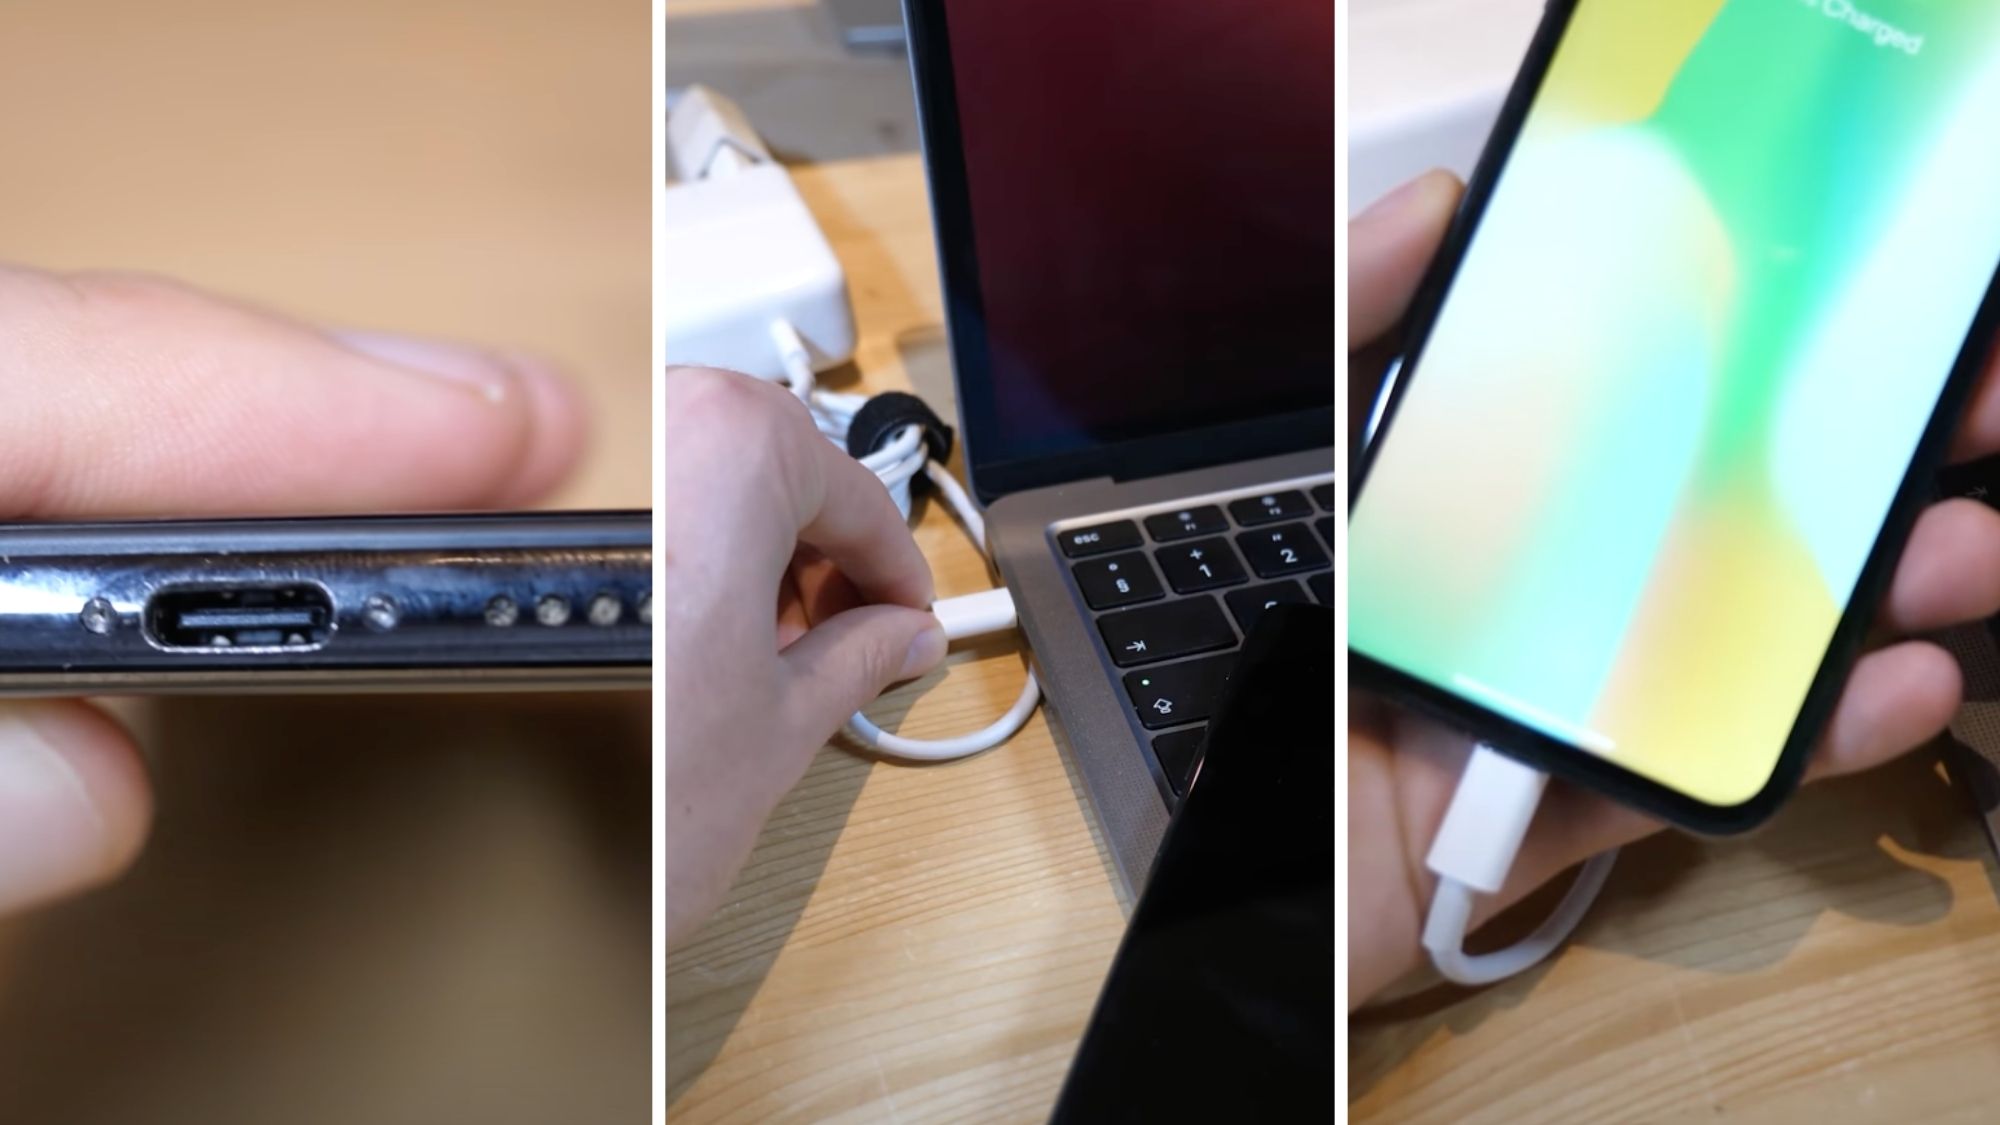 The USB-C iPhone Mod - Proof of Concept 